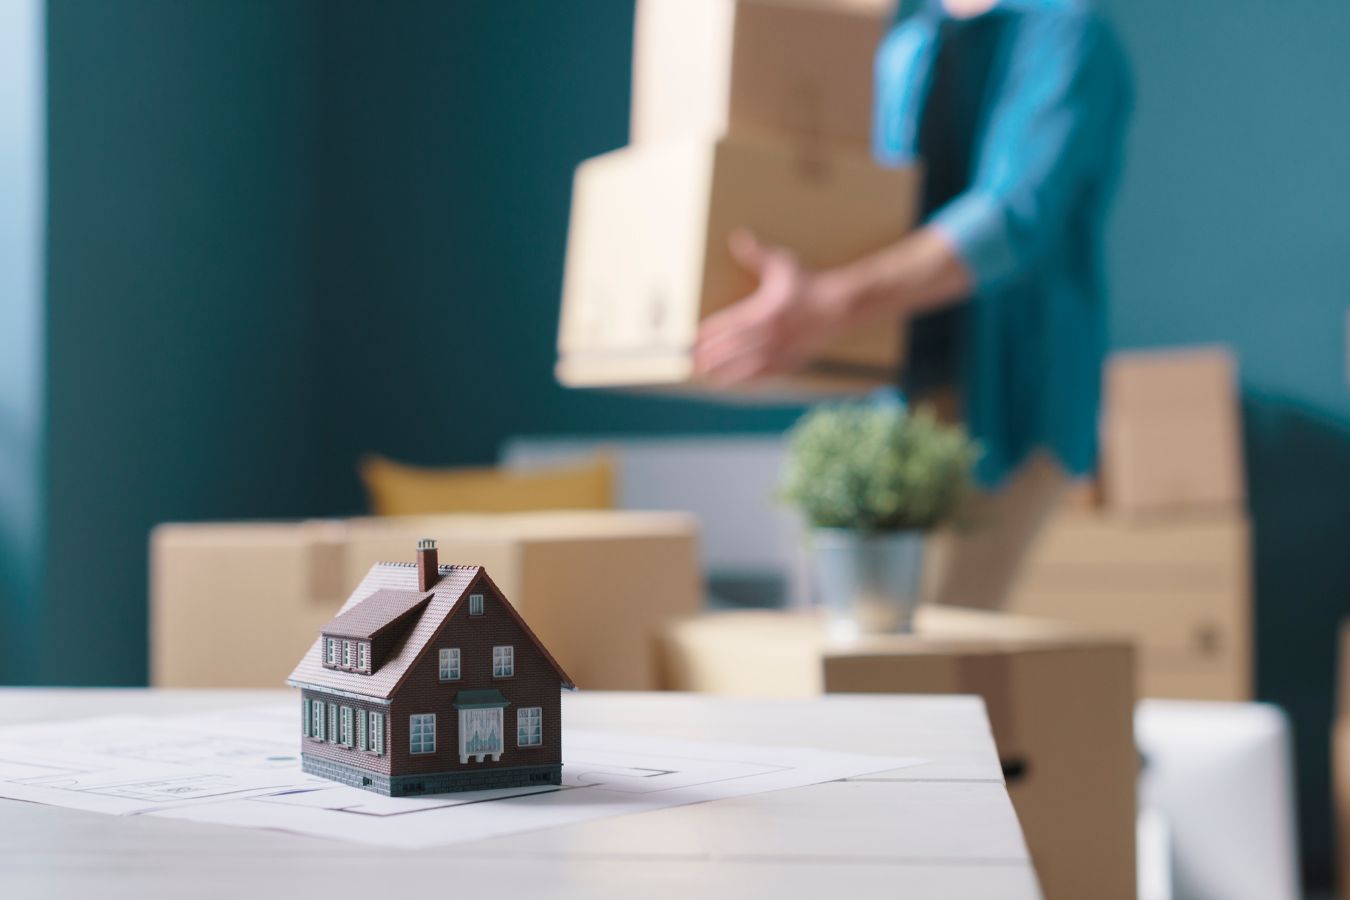 A man carrying boxes in hand and in front of him is a toy house on a table